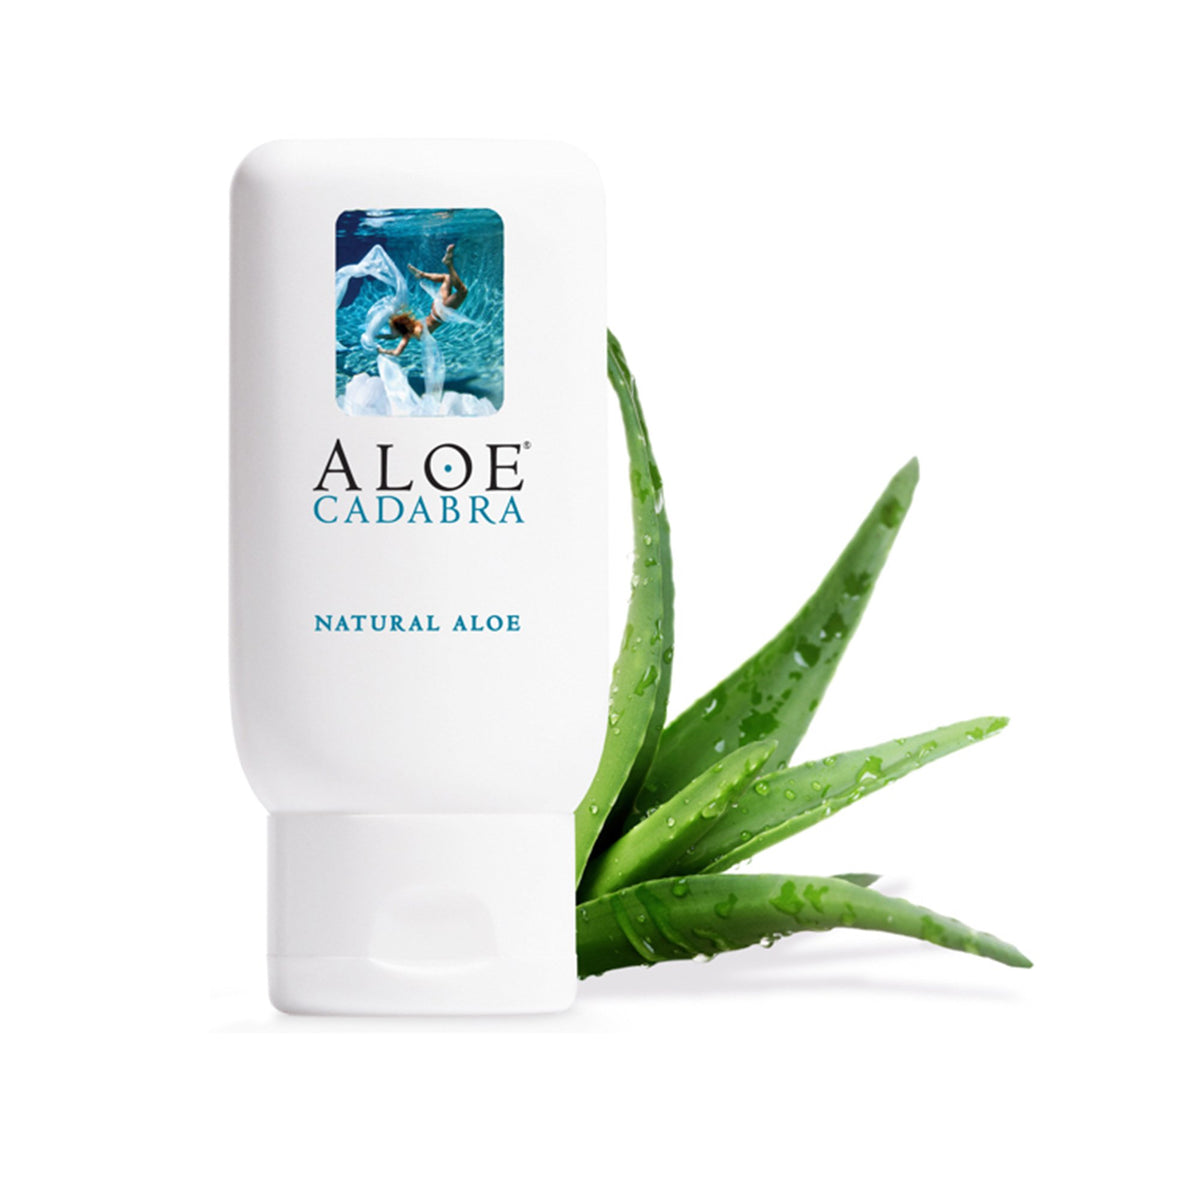 Aloe Cadabra® nourishes your skin while enhancing you know what, naturally. Made with 95% organic aloe vera and enriched with vitamin E, Aloe Cadabra gives you all the good, and none of the bad. Use it for fun. Use it to restore your everyday comfort. 2.5 oz Unscented.